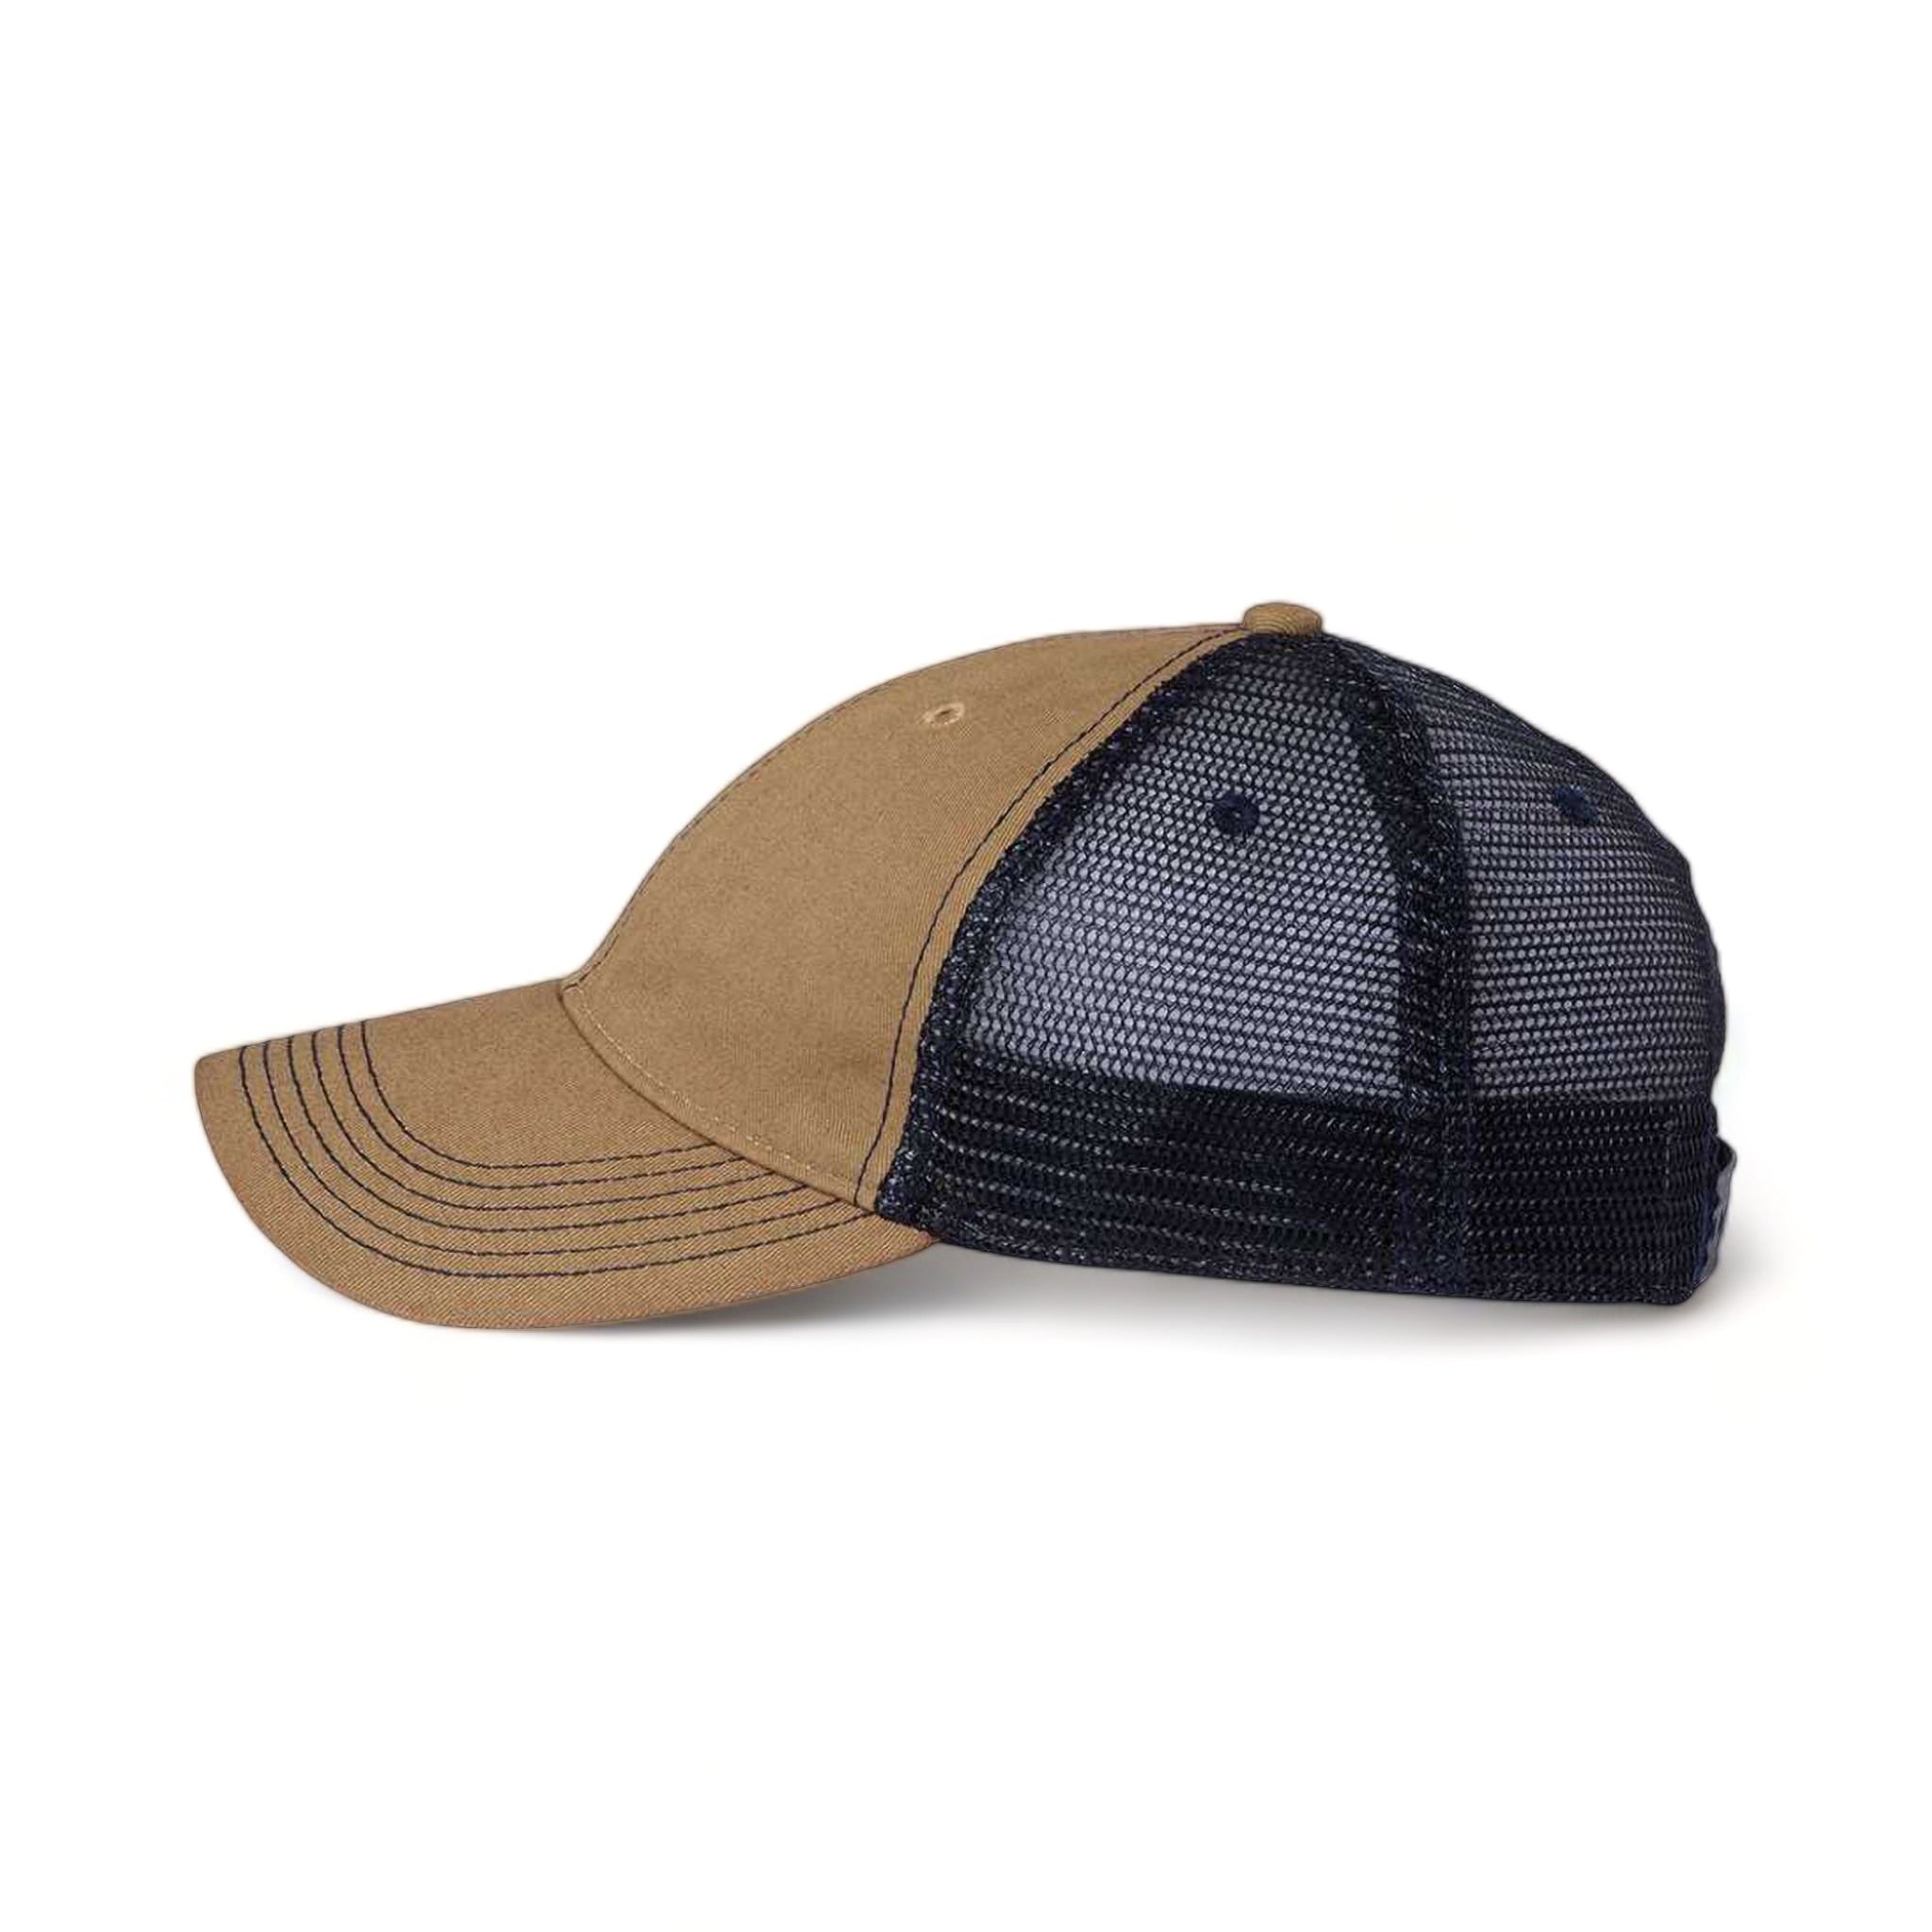 Side view of LEGACY OFA custom hat in khaki and navy